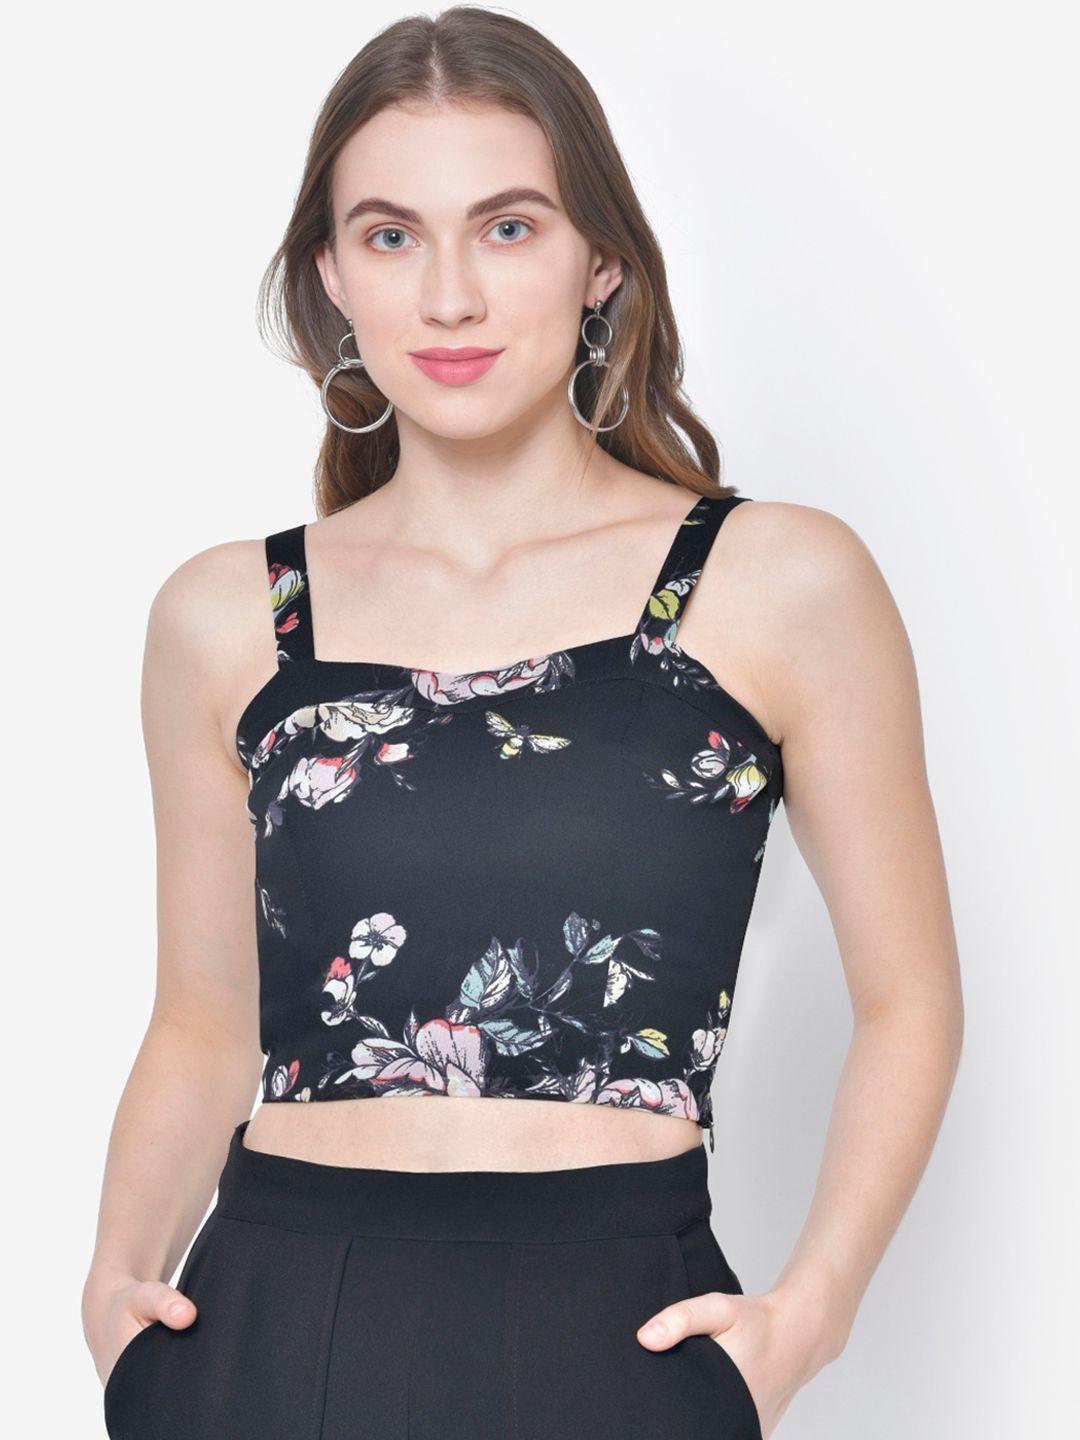 martini-women-black-floral-print-fitted-crop-top